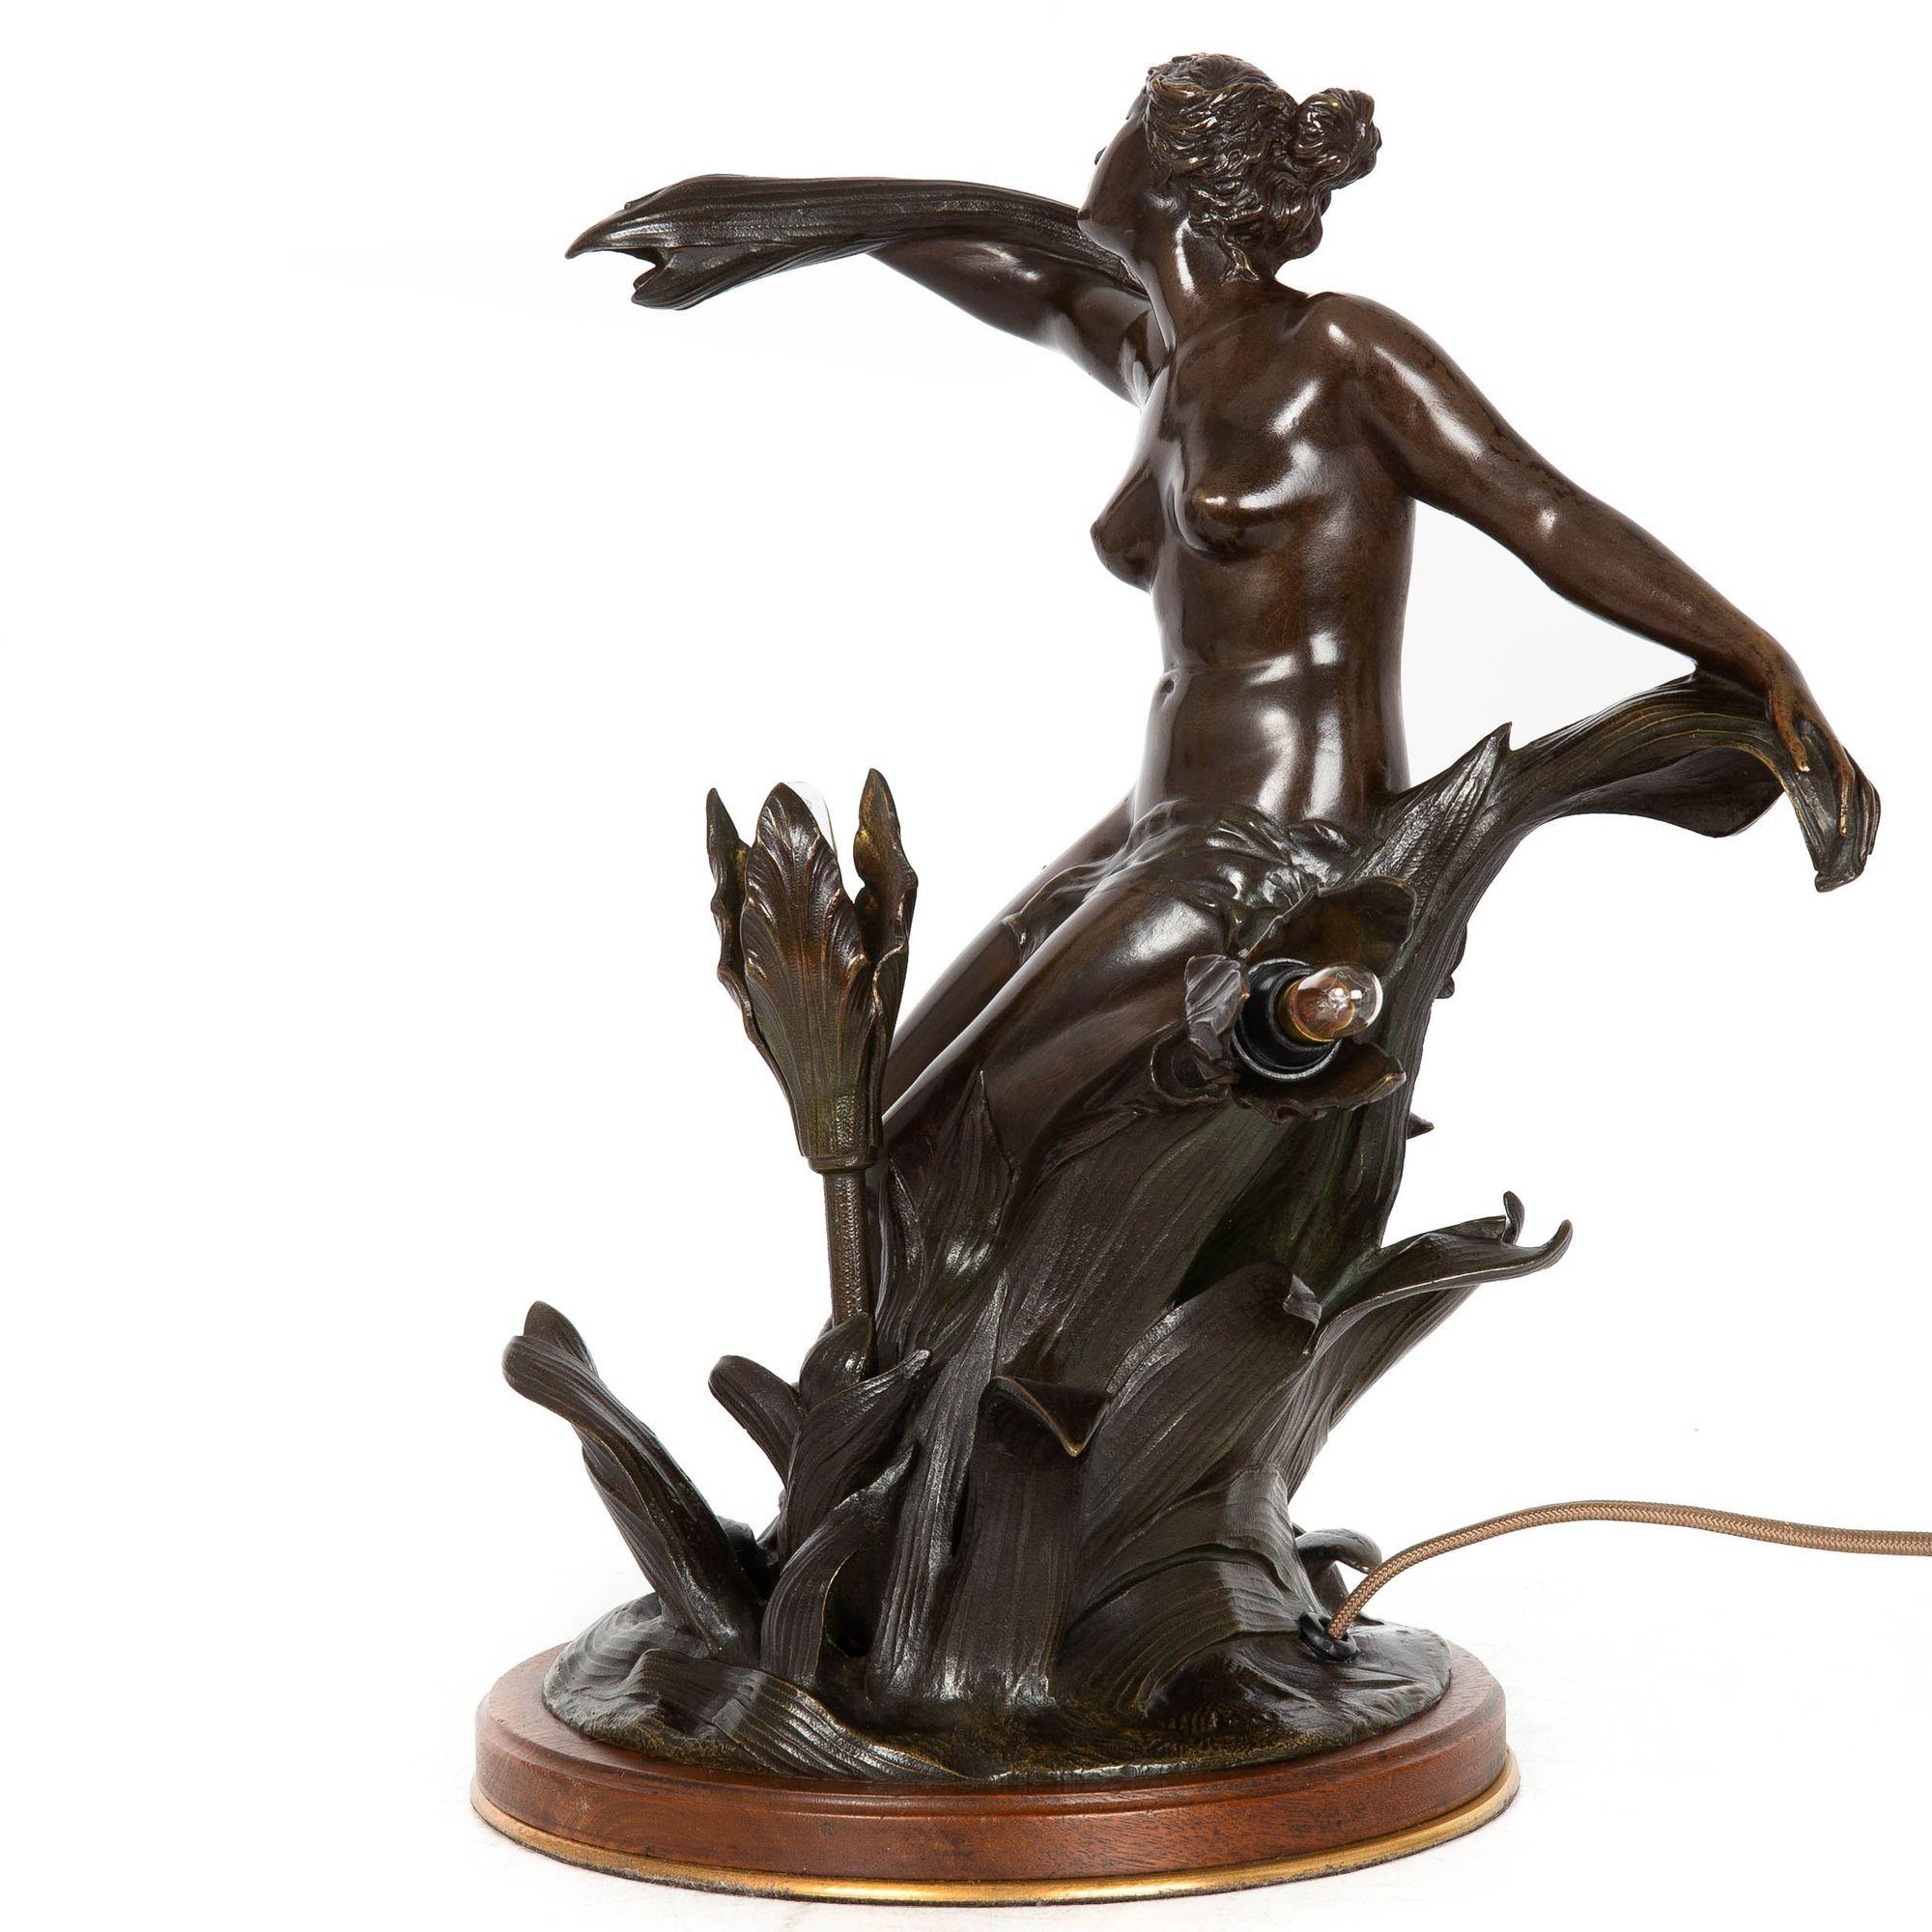 FRENCH SCHOOL
Early 20th century

Table Lamp of a Maiden Intertwined with Flowers

Patinated bronze  situated over an original walnut base  unsigned

Item # 212MOL15P 

A fluid and sensuous table lamp executed entirely in bronze, it captures a young